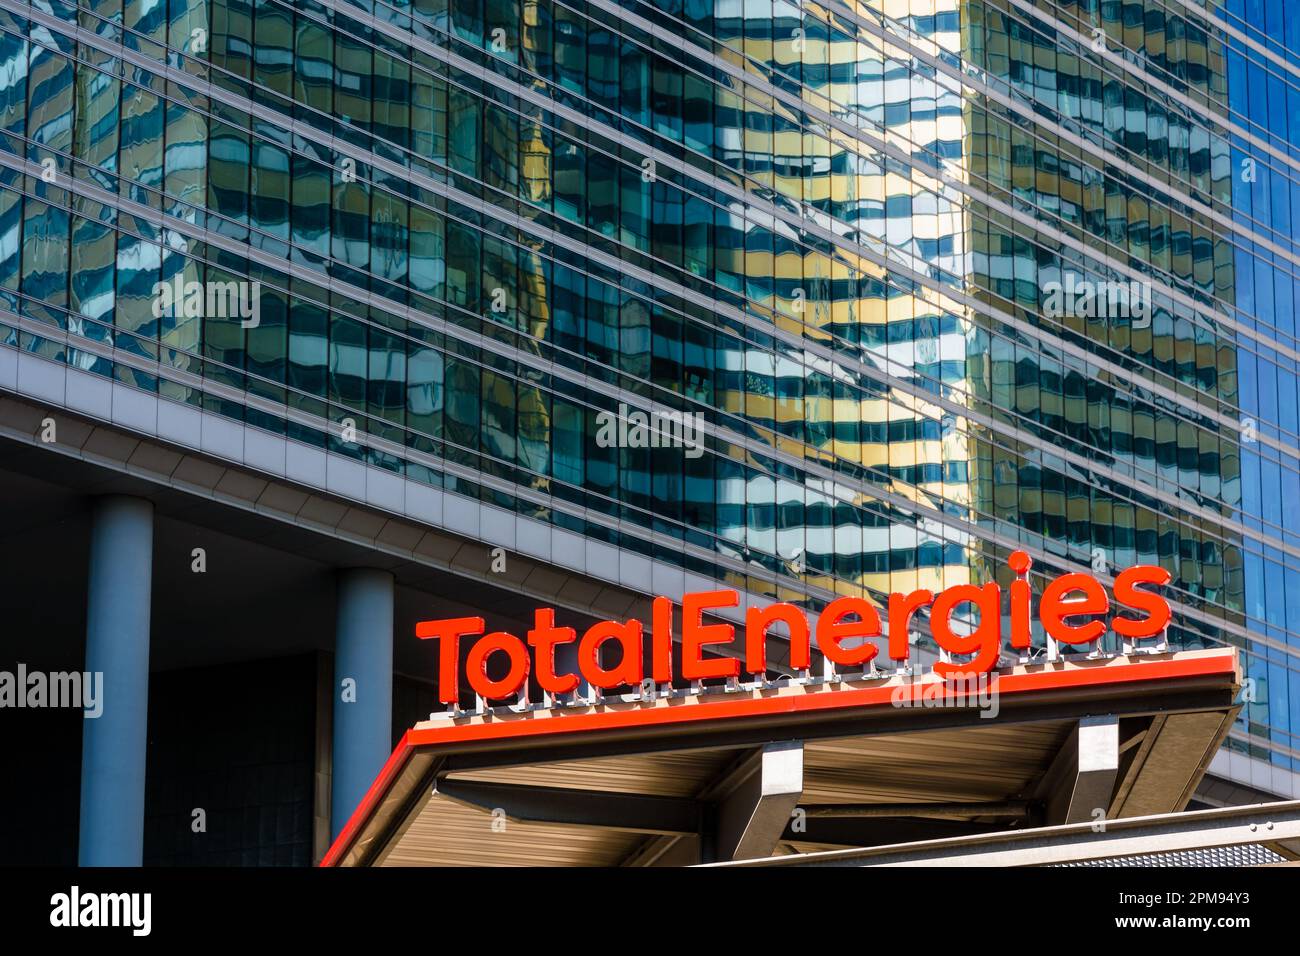 Sign of a TotalEnergies service station with a glass building in the background. Stock Photo